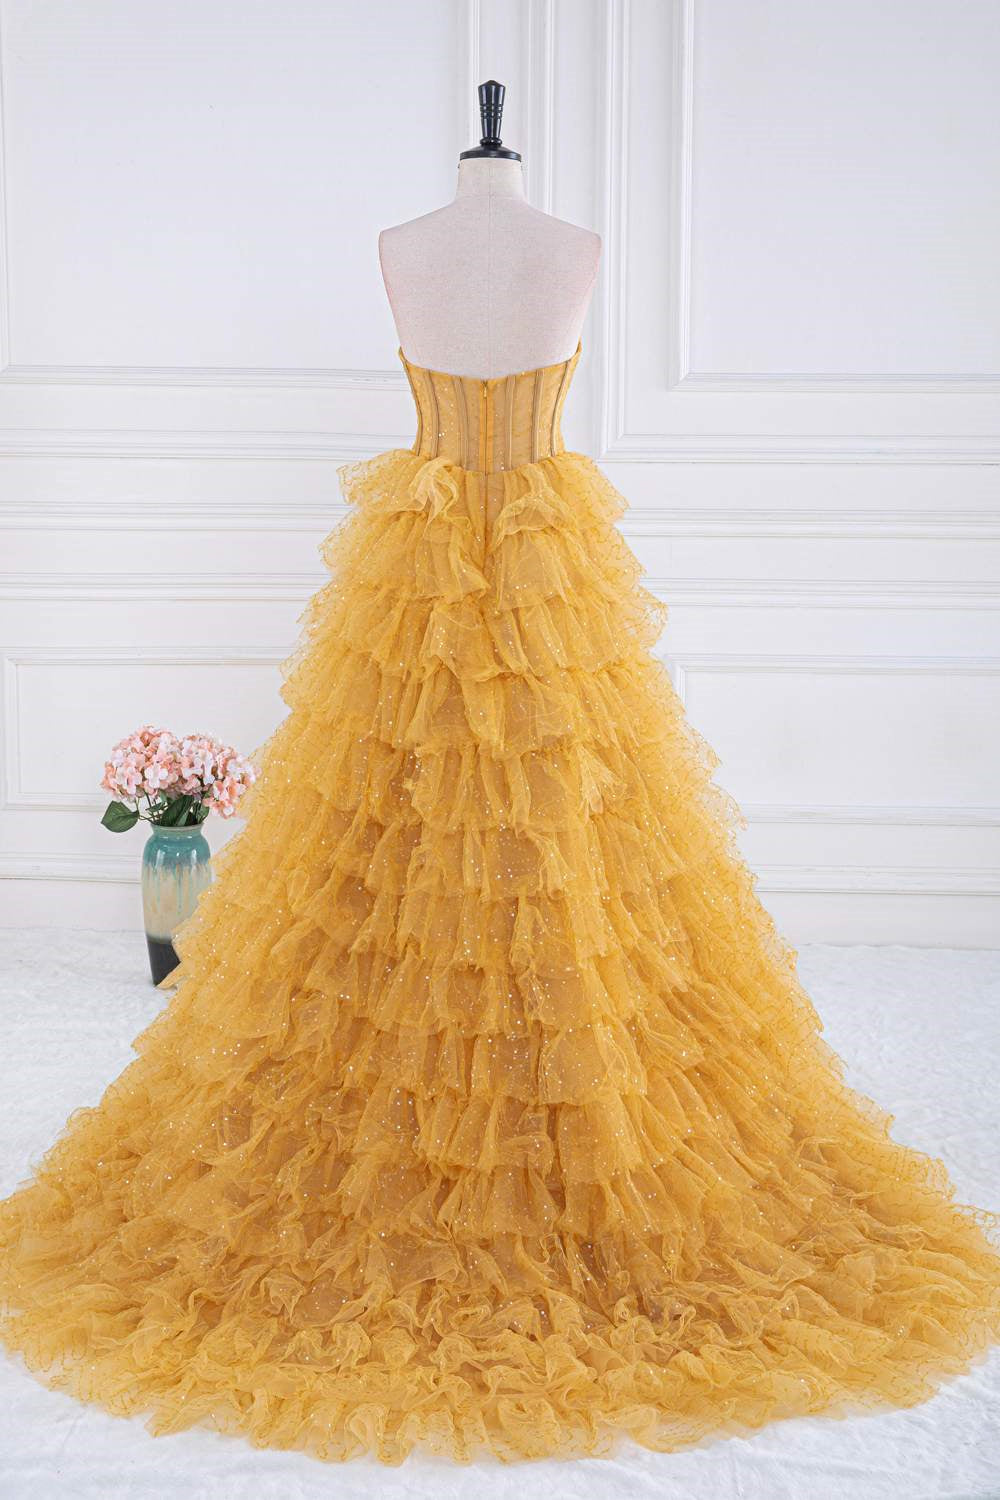 Layers Tulle Yellow Prom Dresses With Ruching Bodice